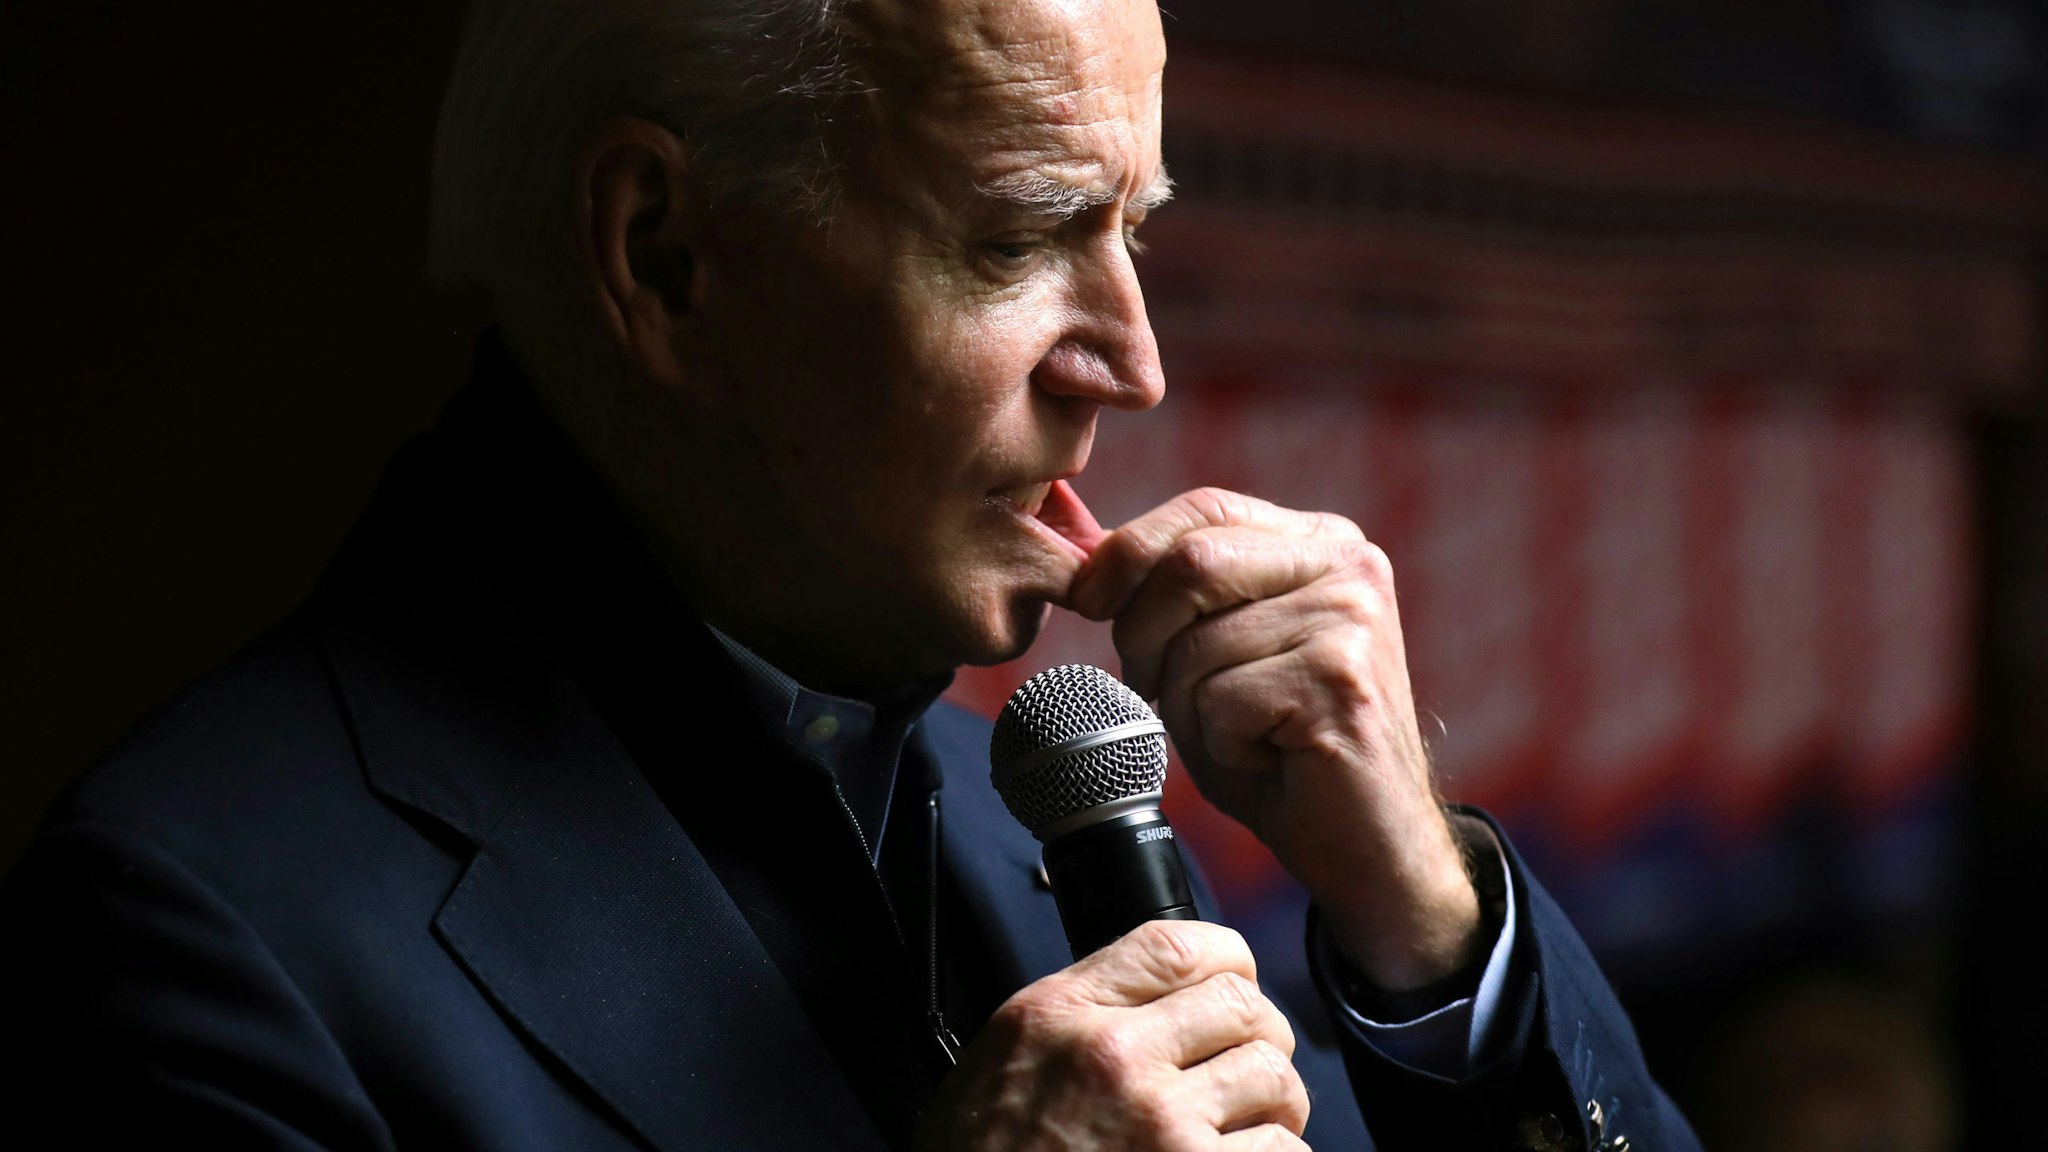 DAVENPORT, IOWA - JANUARY 28: Democratic presidential candidate, former Vice President Joe Biden talks to campaign volunteers during a stop at Jeno's Little Hungary January 28, 2020 in Davenport, Iowa. The Iowa caucuses are February 3.